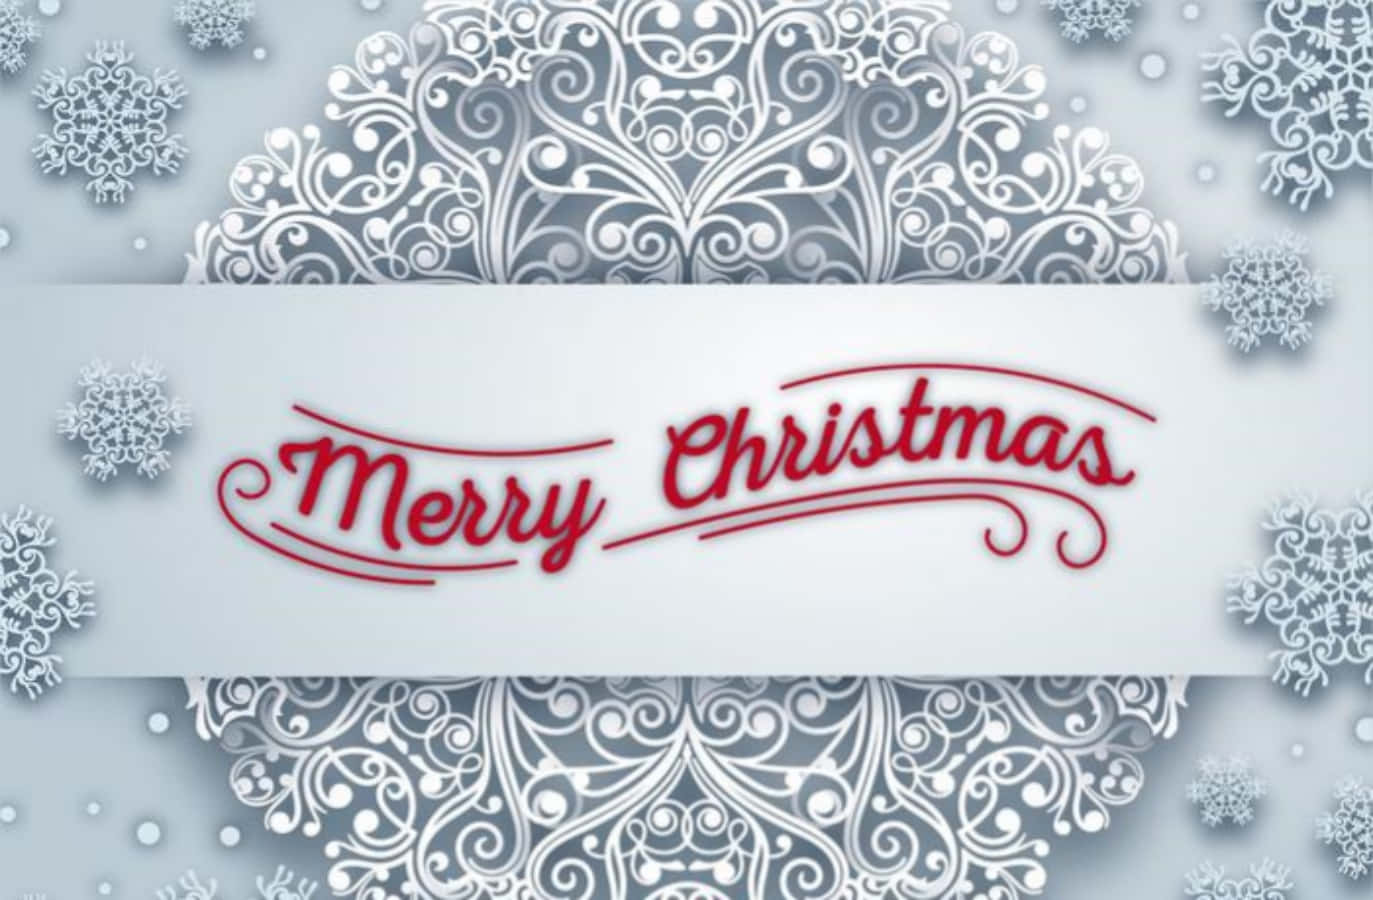 Merry Christmas Background With Snowflakes